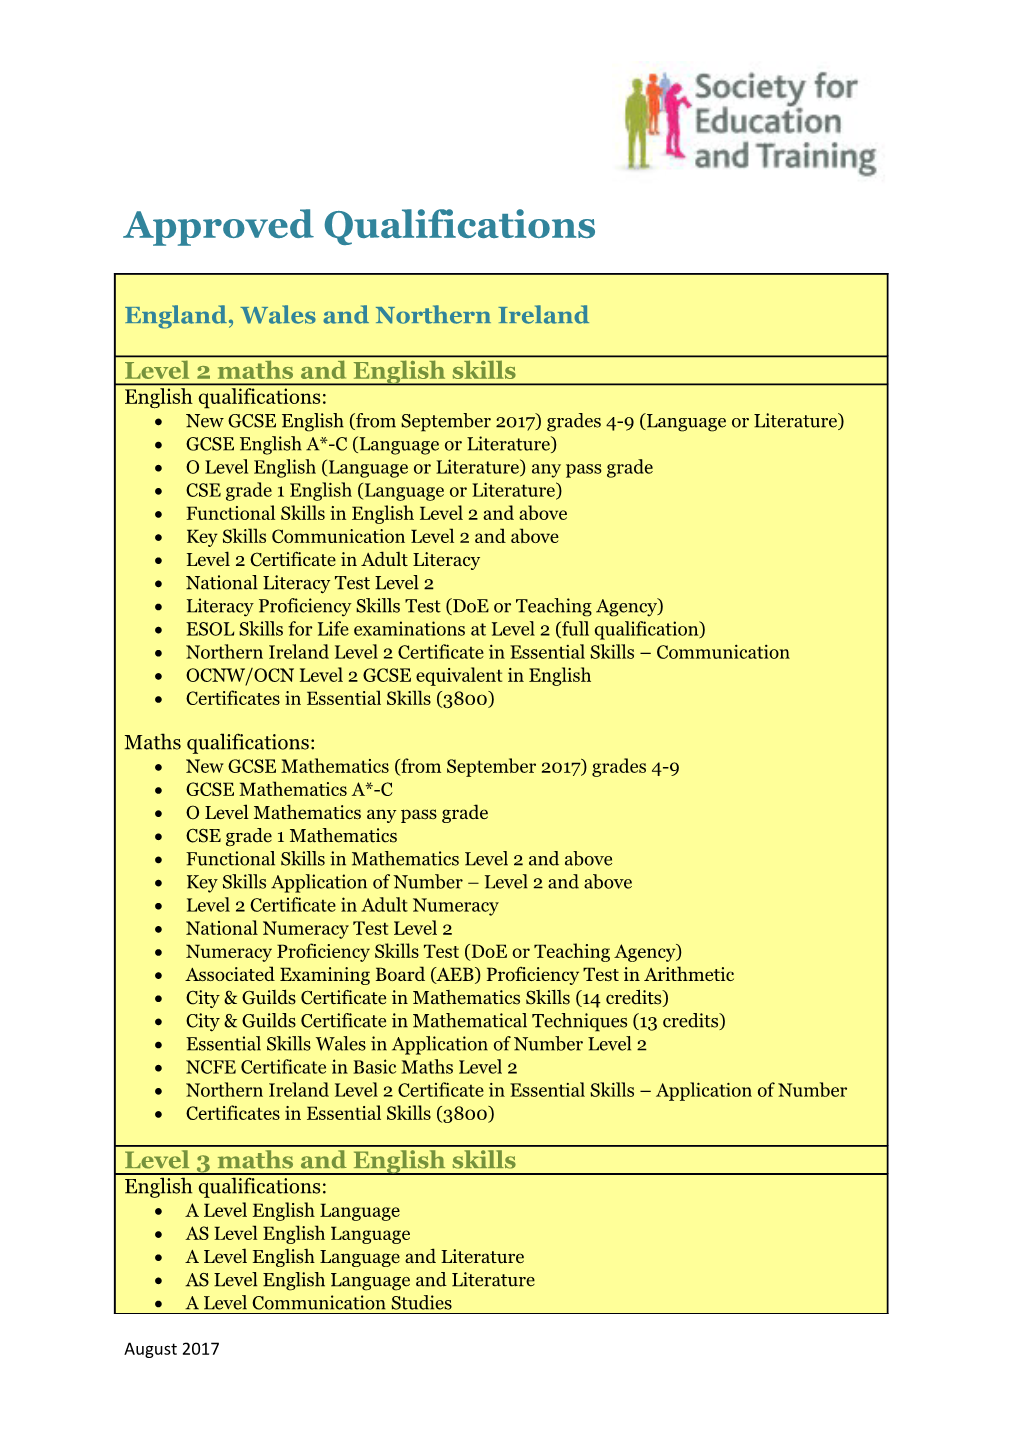 Approved Qualifications